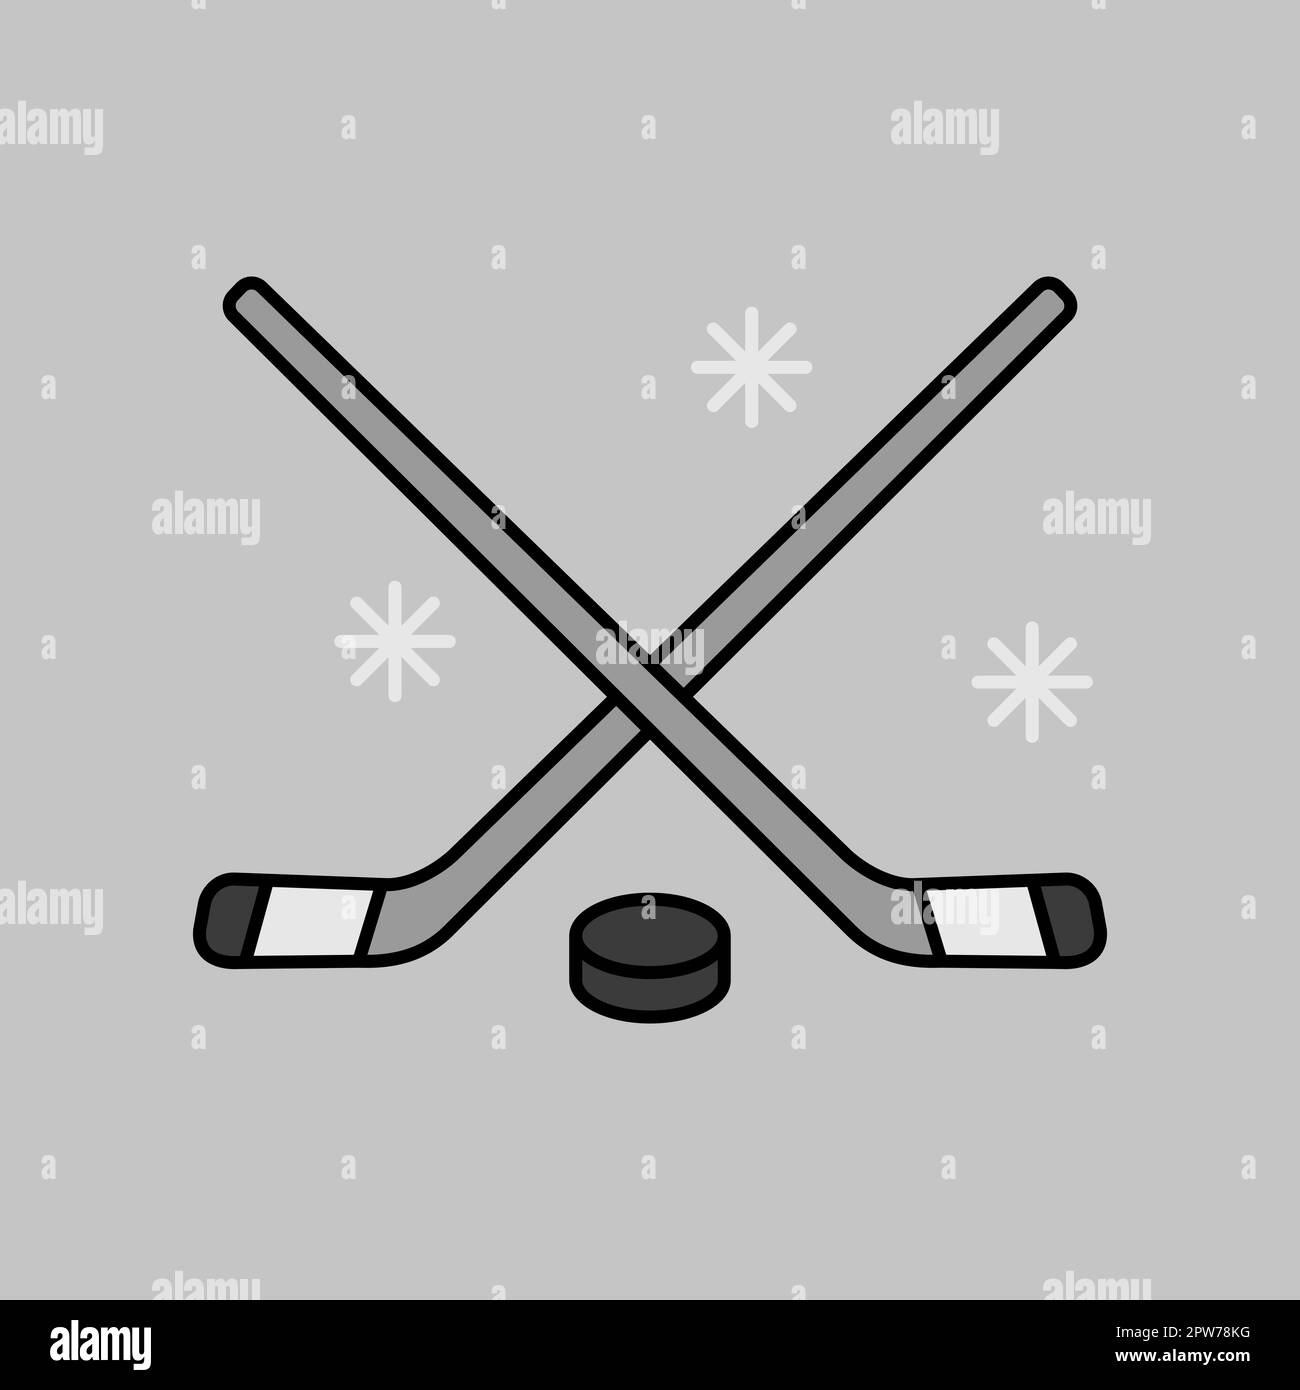 https://c8.alamy.com/comp/2PW78KG/ice-hockey-sticks-and-puck-vector-isolated-grayscale-icon-winter-sign-graph-symbol-for-travel-and-tourism-web-site-and-apps-design-logo-app-ui-2PW78KG.jpg